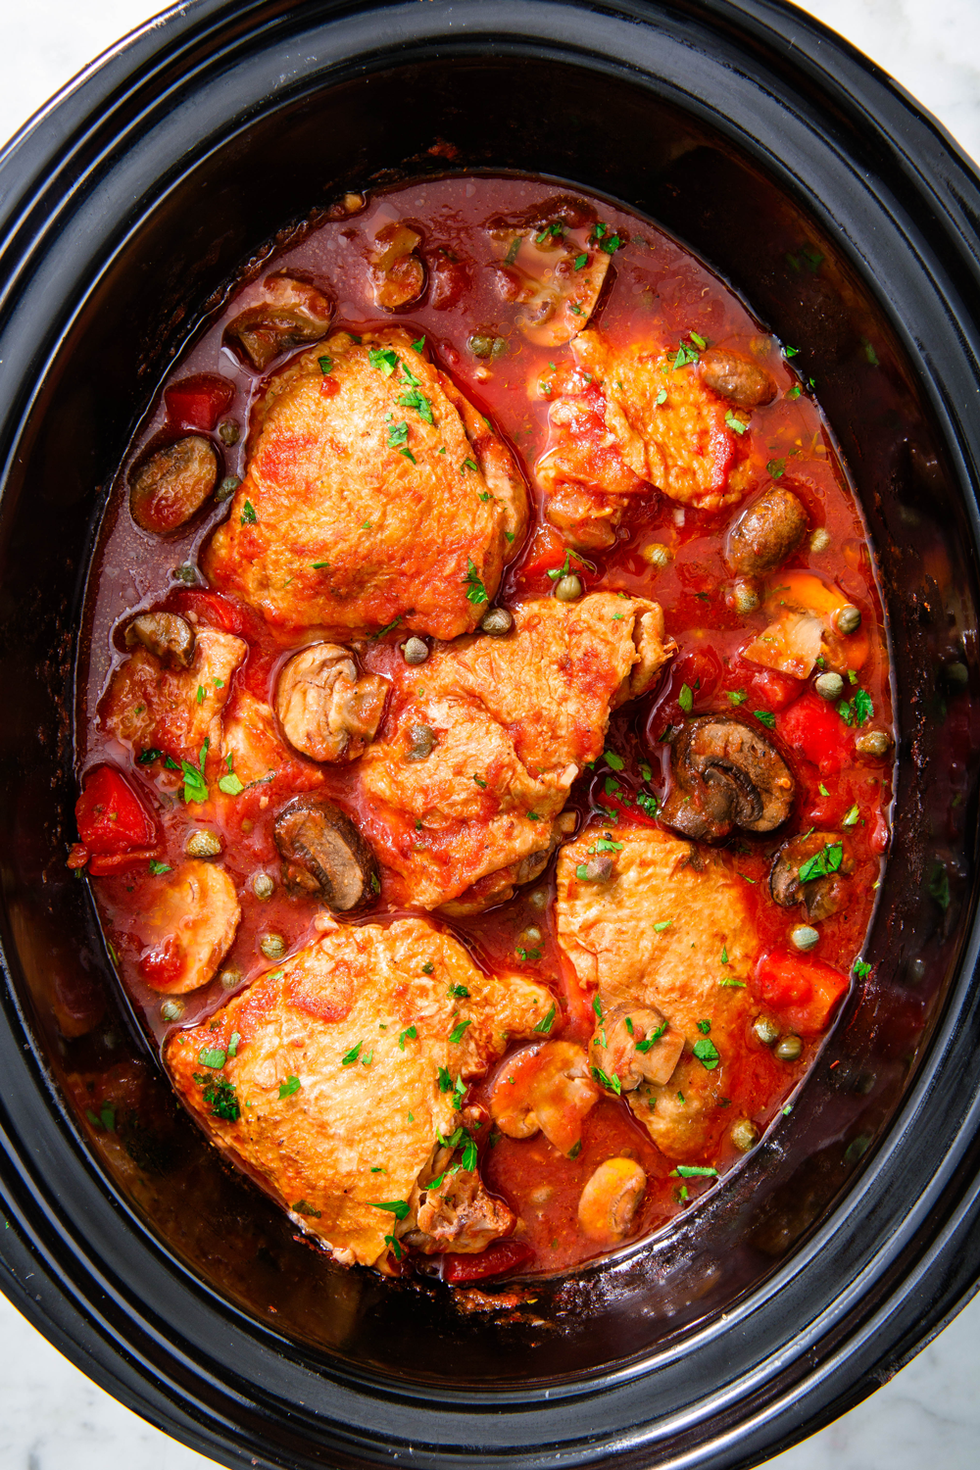 https://hips.hearstapps.com/hmg-prod/images/slo-cooker-chicken-cacciatore-vertical-1536771734.png?crop=1xw:1xh;center,top&resize=980:*